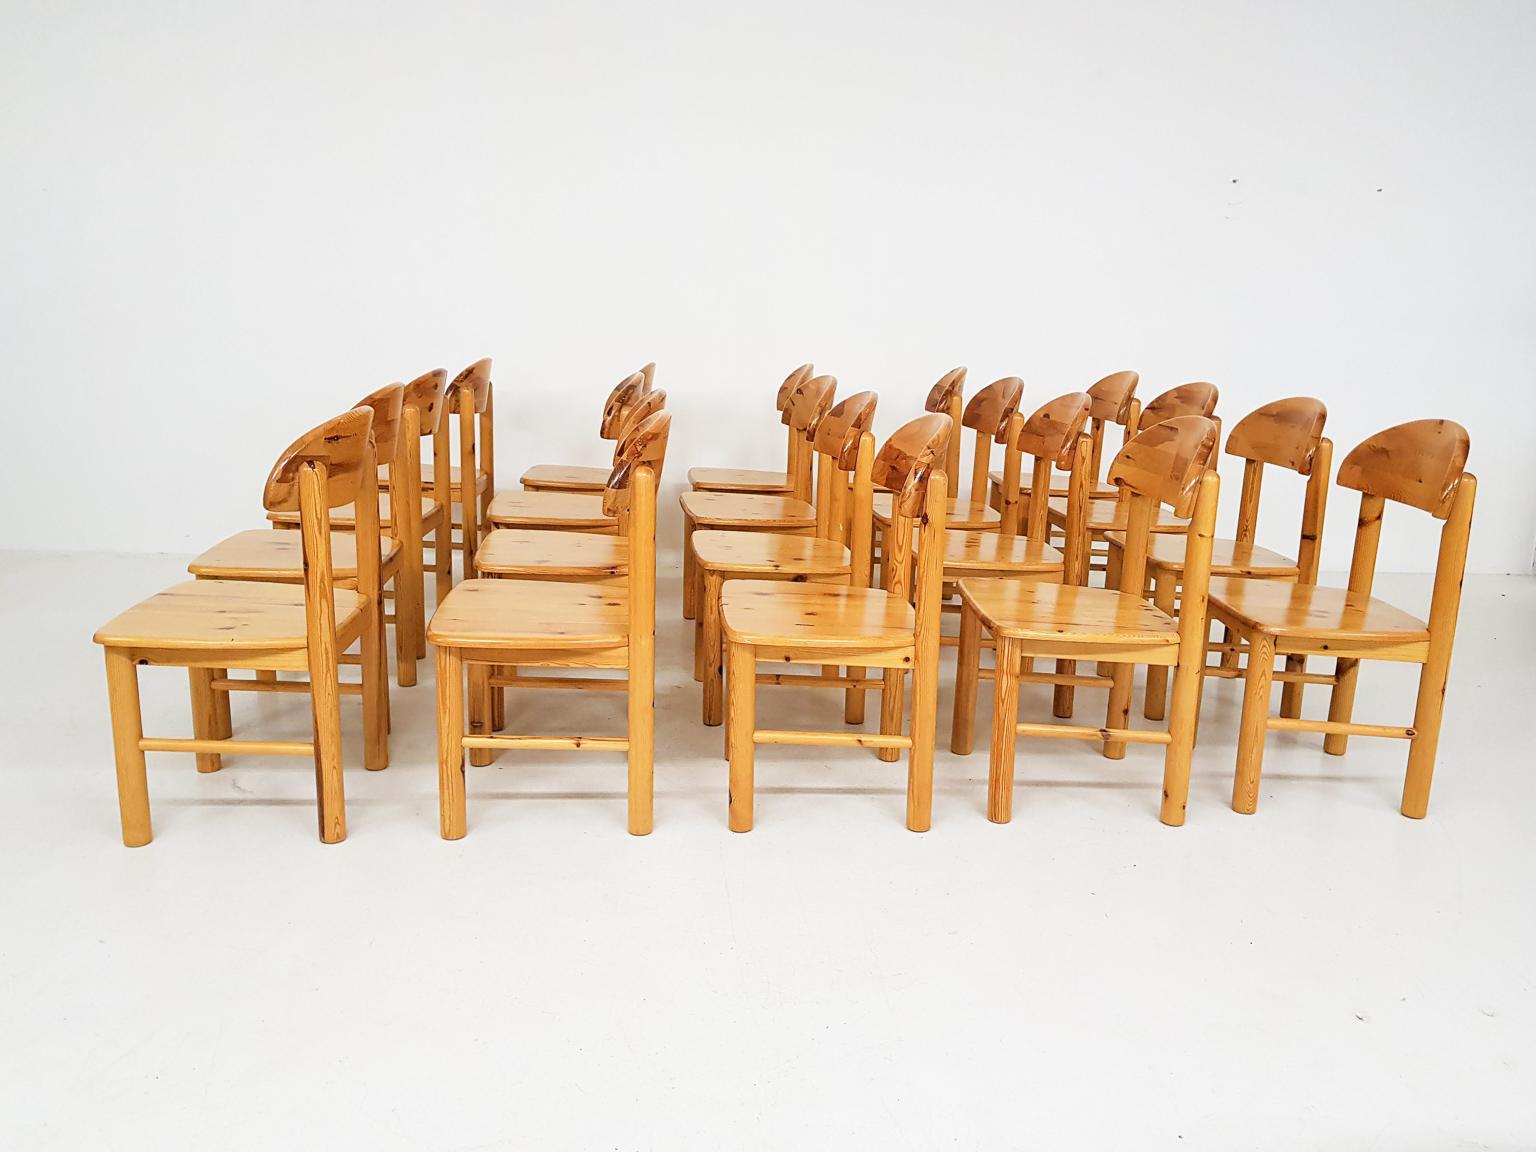 Large set of 20 pinewood dining chairs by Rainer Daumiller for Hirtshals Savvaerk (Hirtshals Sawmill). Made in Denmark in the 1960s. We found these chairs in a Danish school where they were used since the 1960s.

Daumiller was clearly inspired by